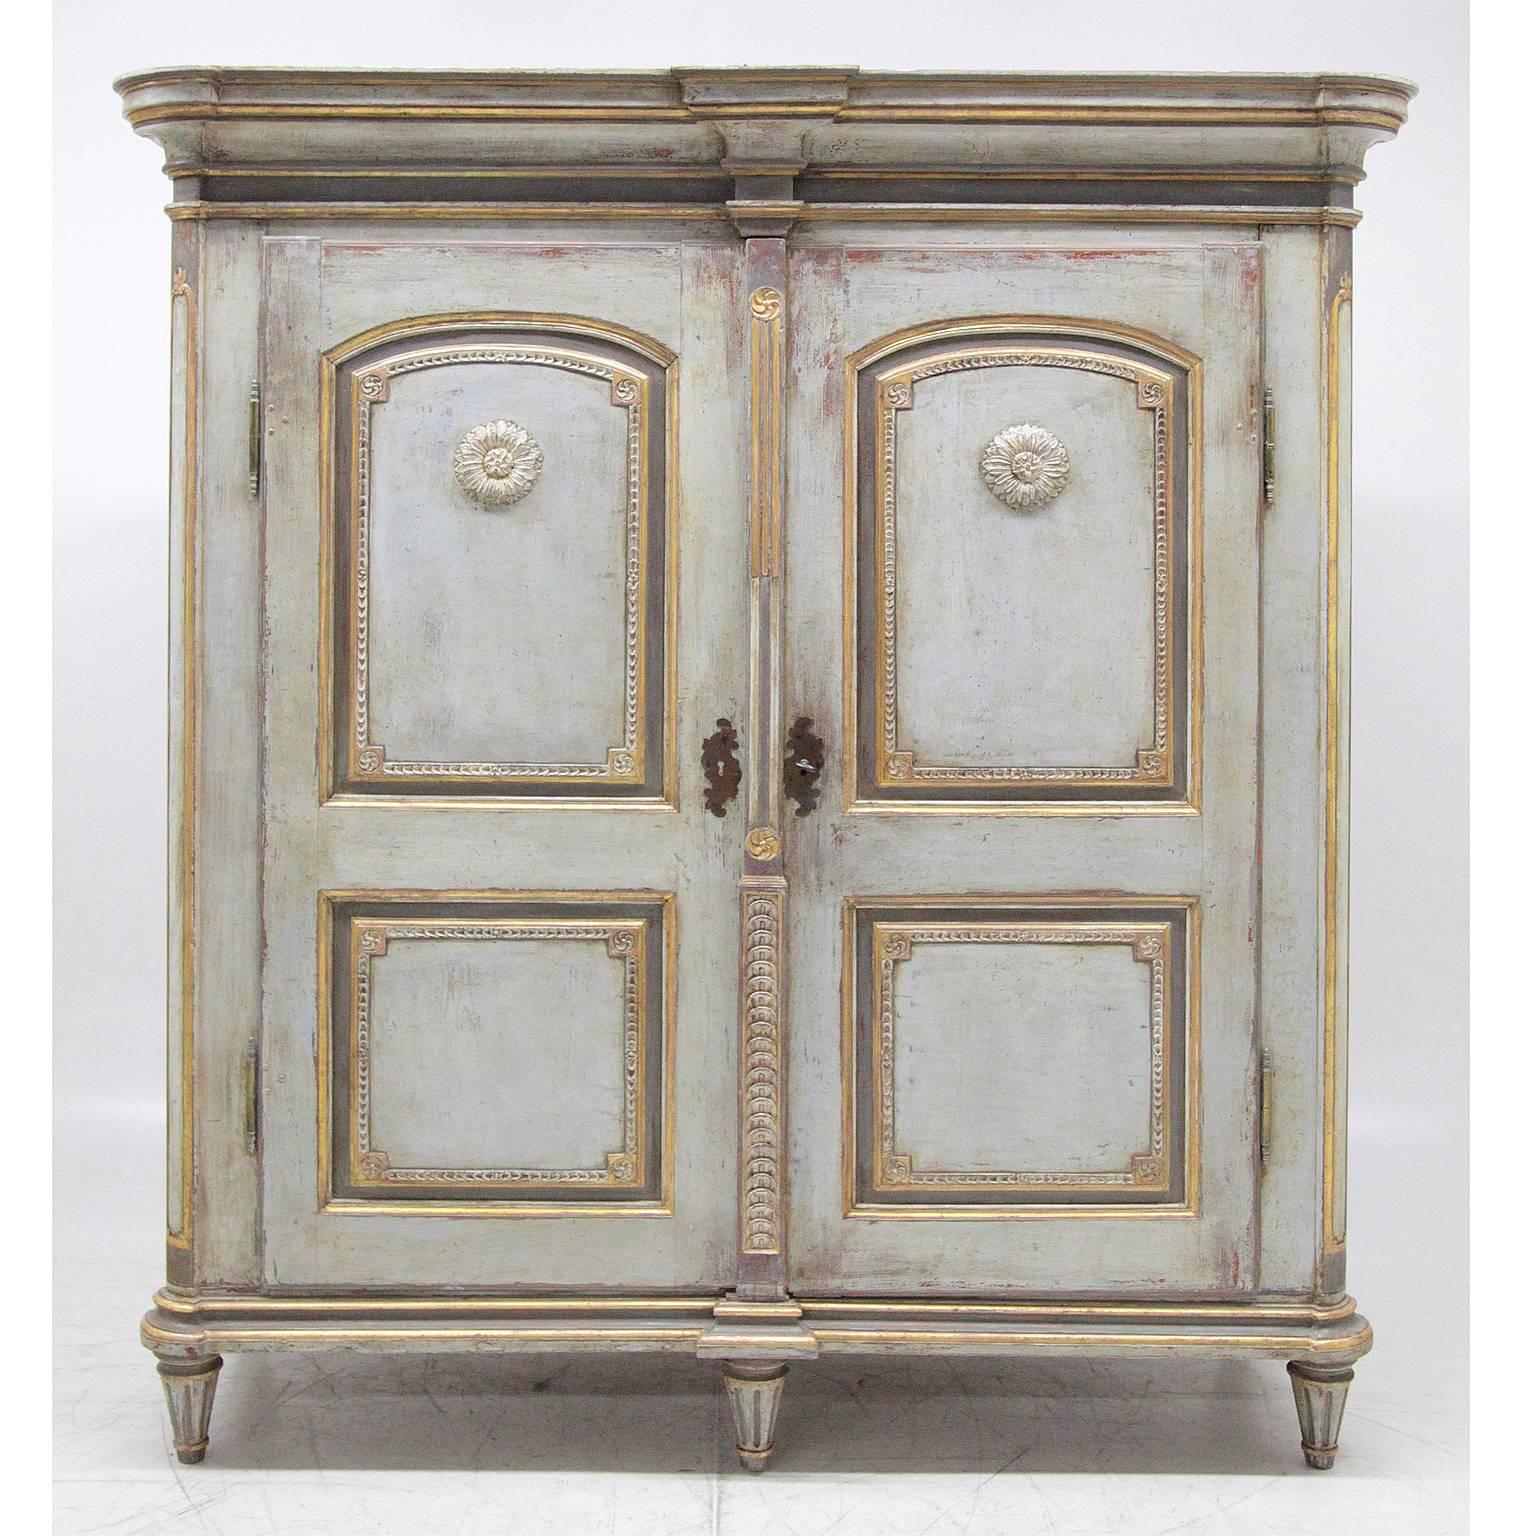 Hand-Painted Louis Seize Cabinet, Saxony/Germany, circa 1780